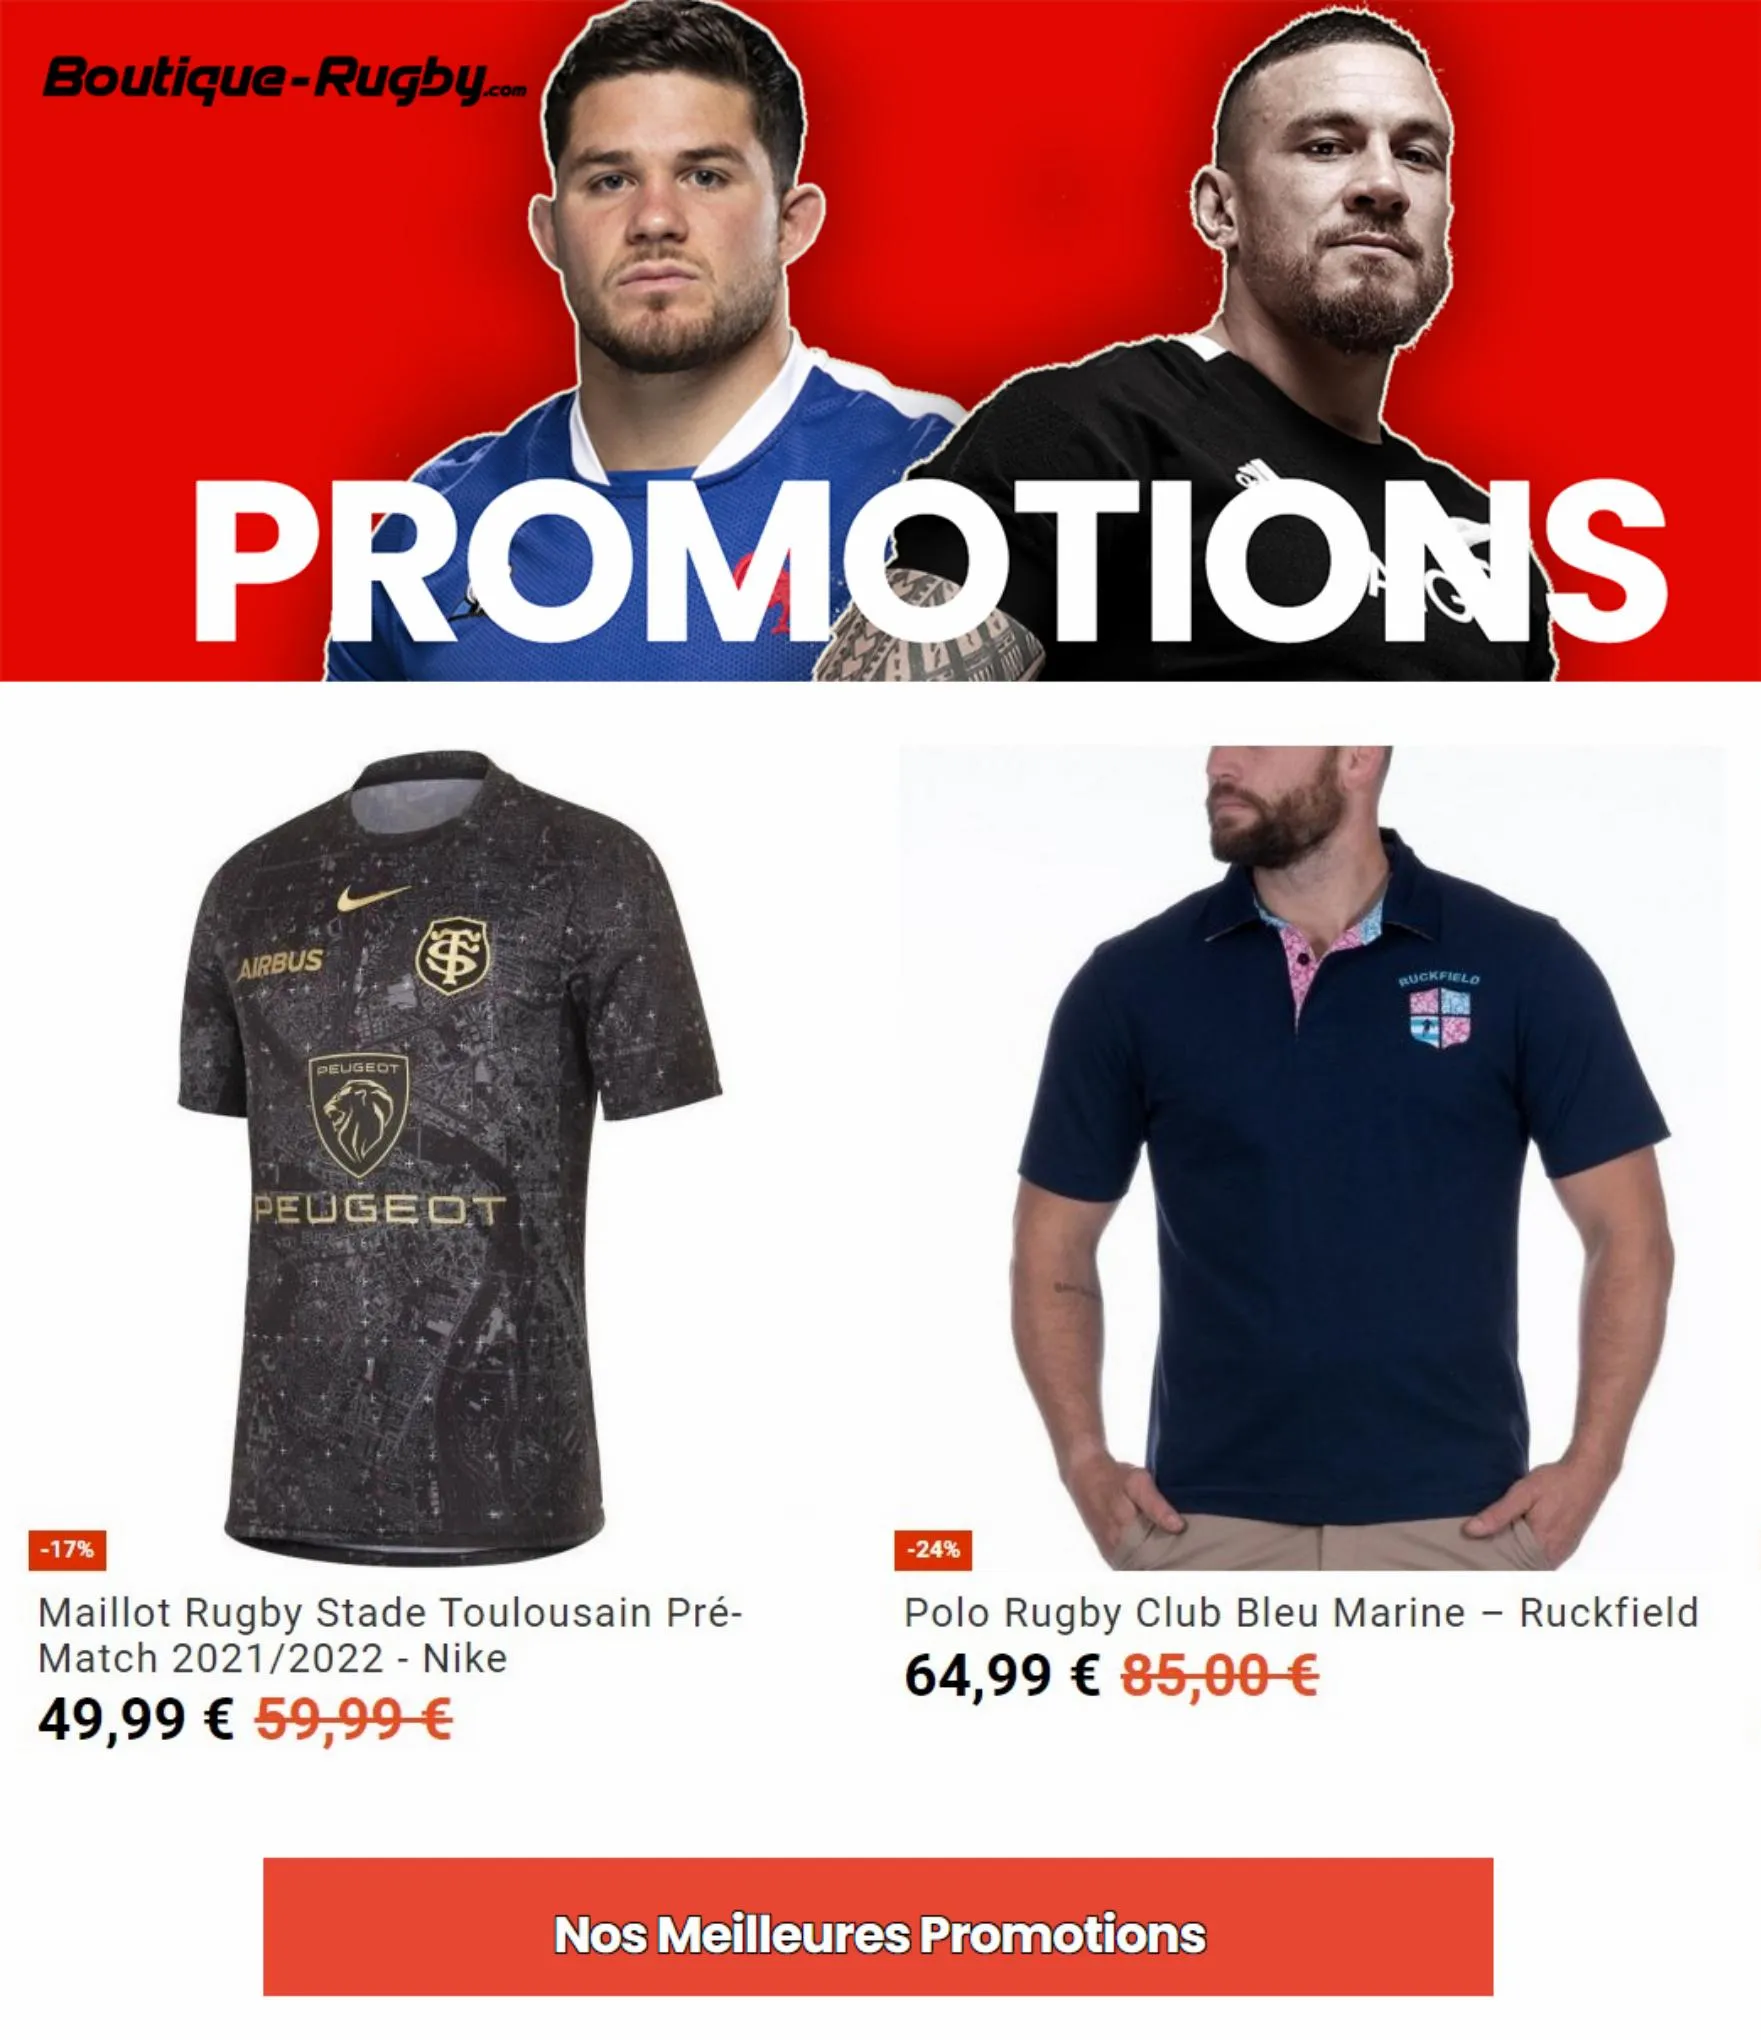 Catalogue Promotions France 2022, page 00001